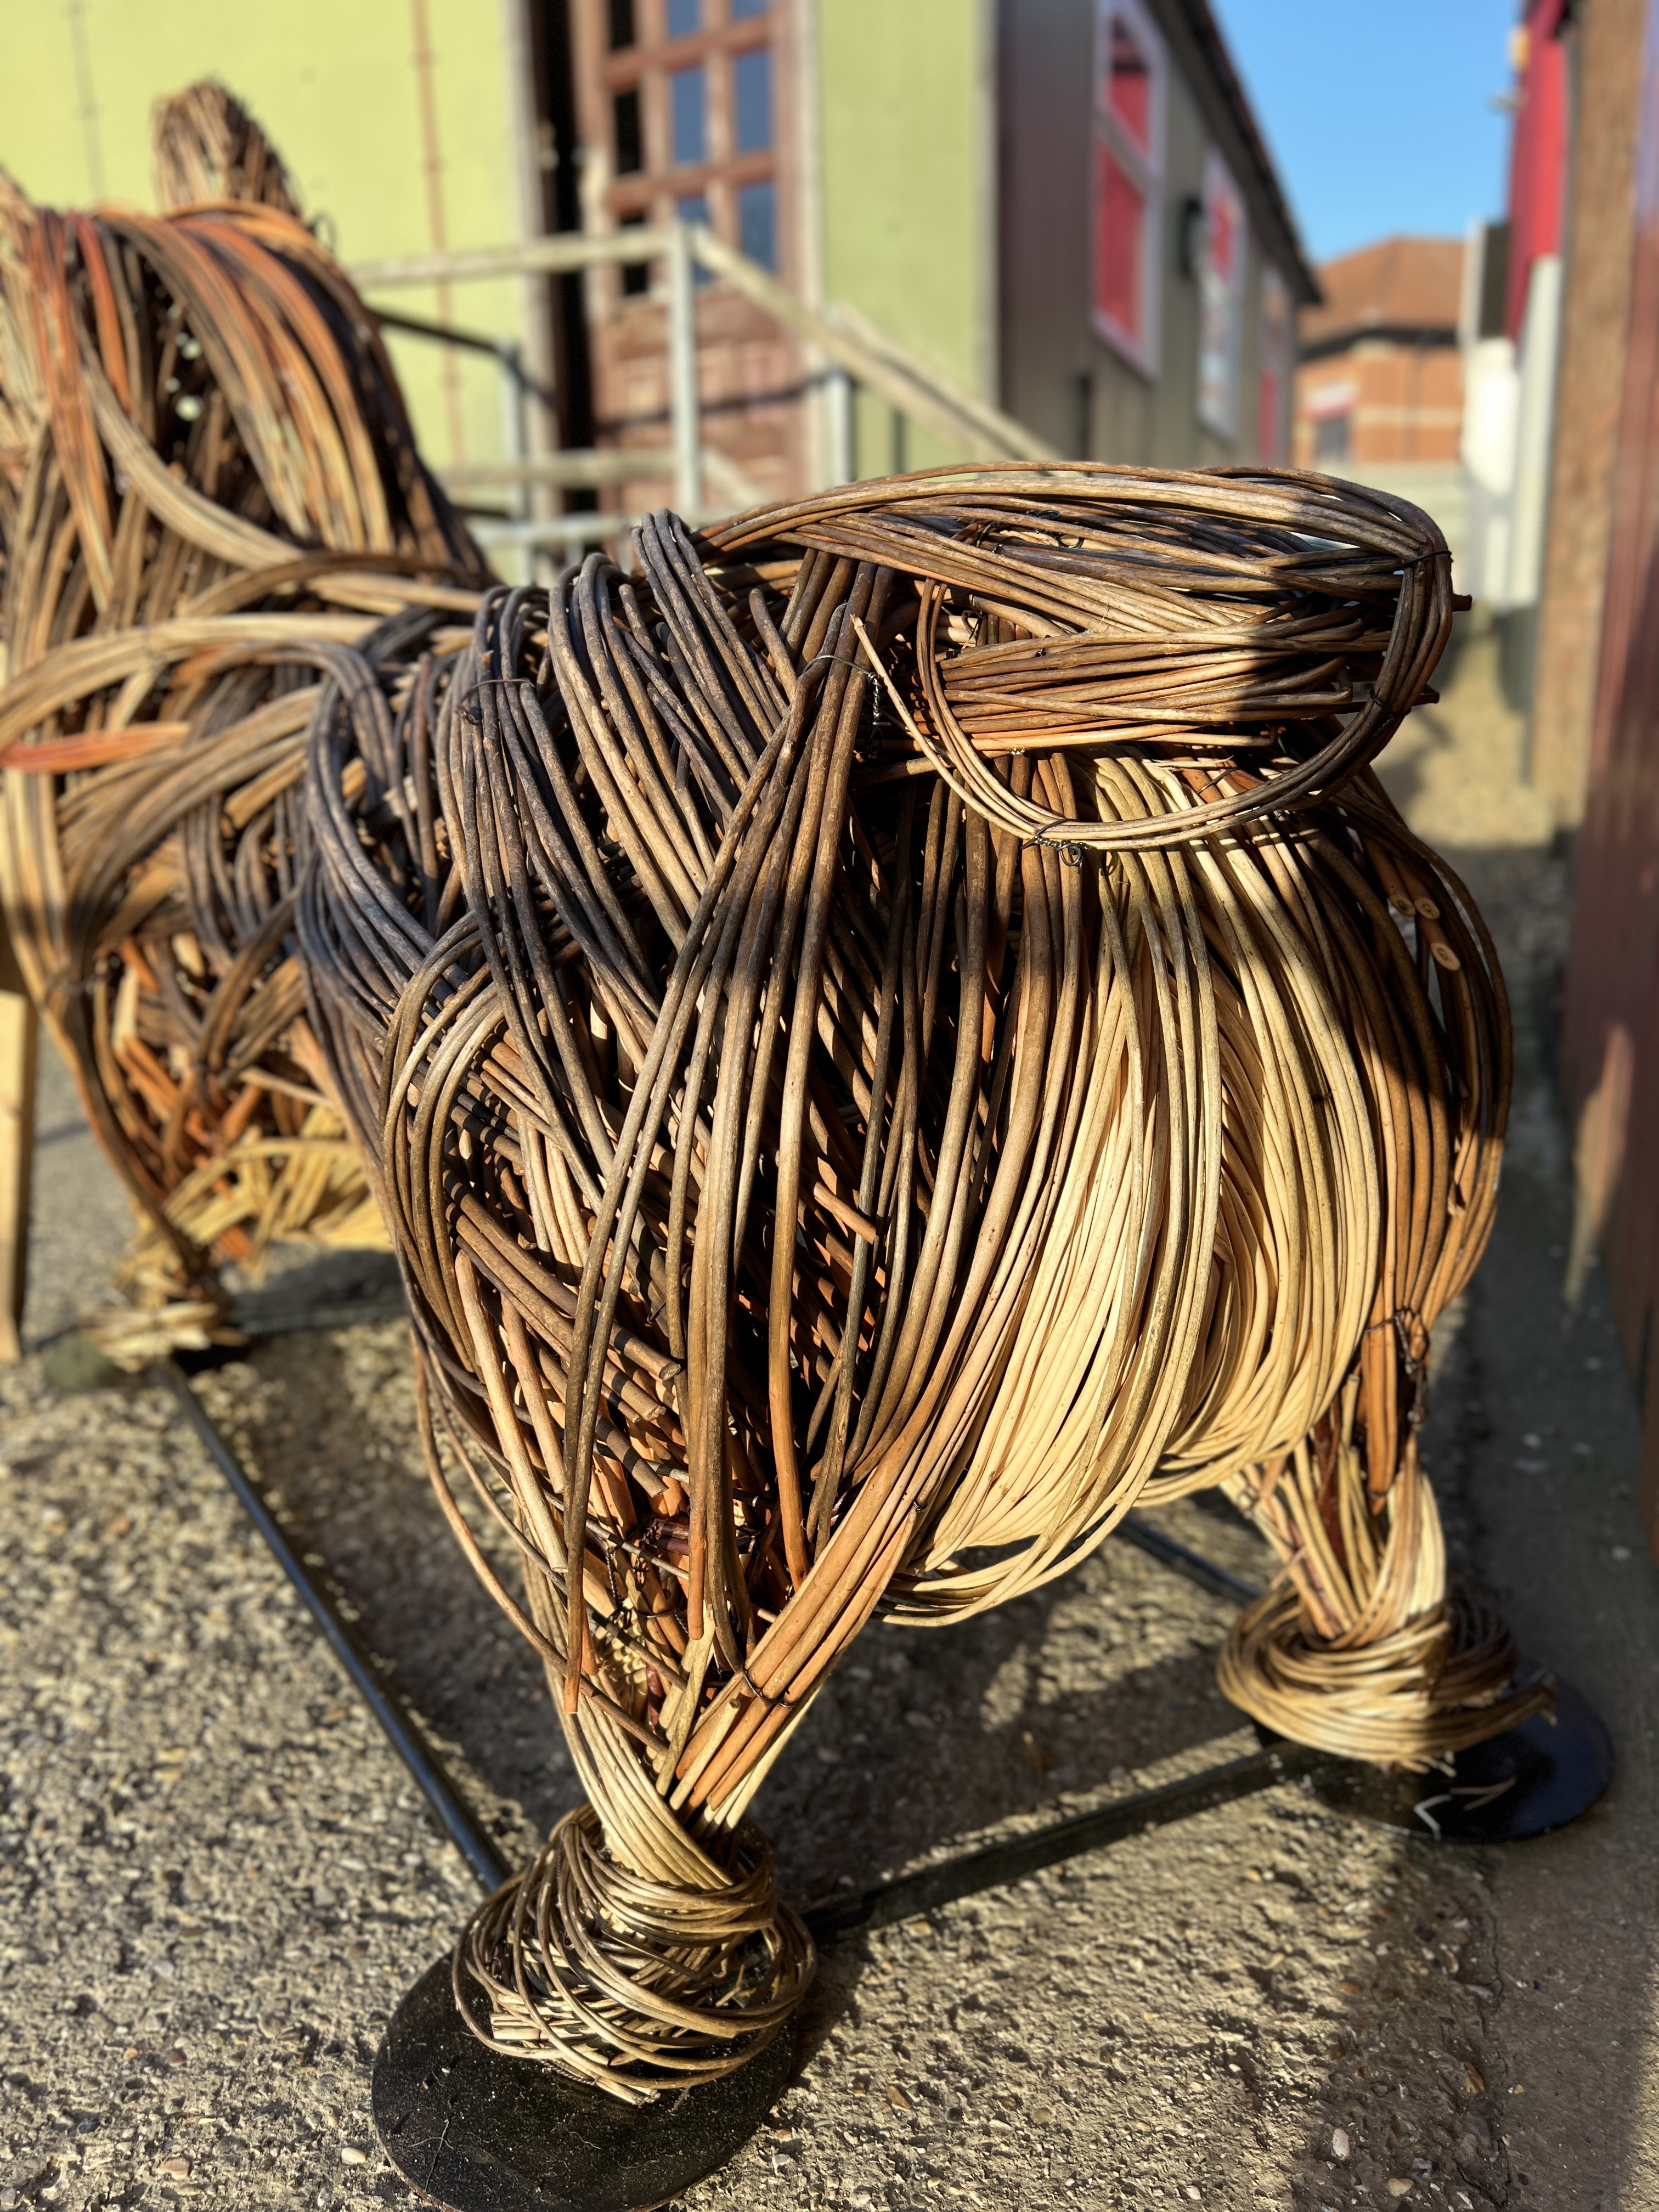 A TIN HOUSE OVERSIZE WILLOW CORGI SCULPTURE BY ALI MACKENZIE "BETTY" No. - Image 8 of 11